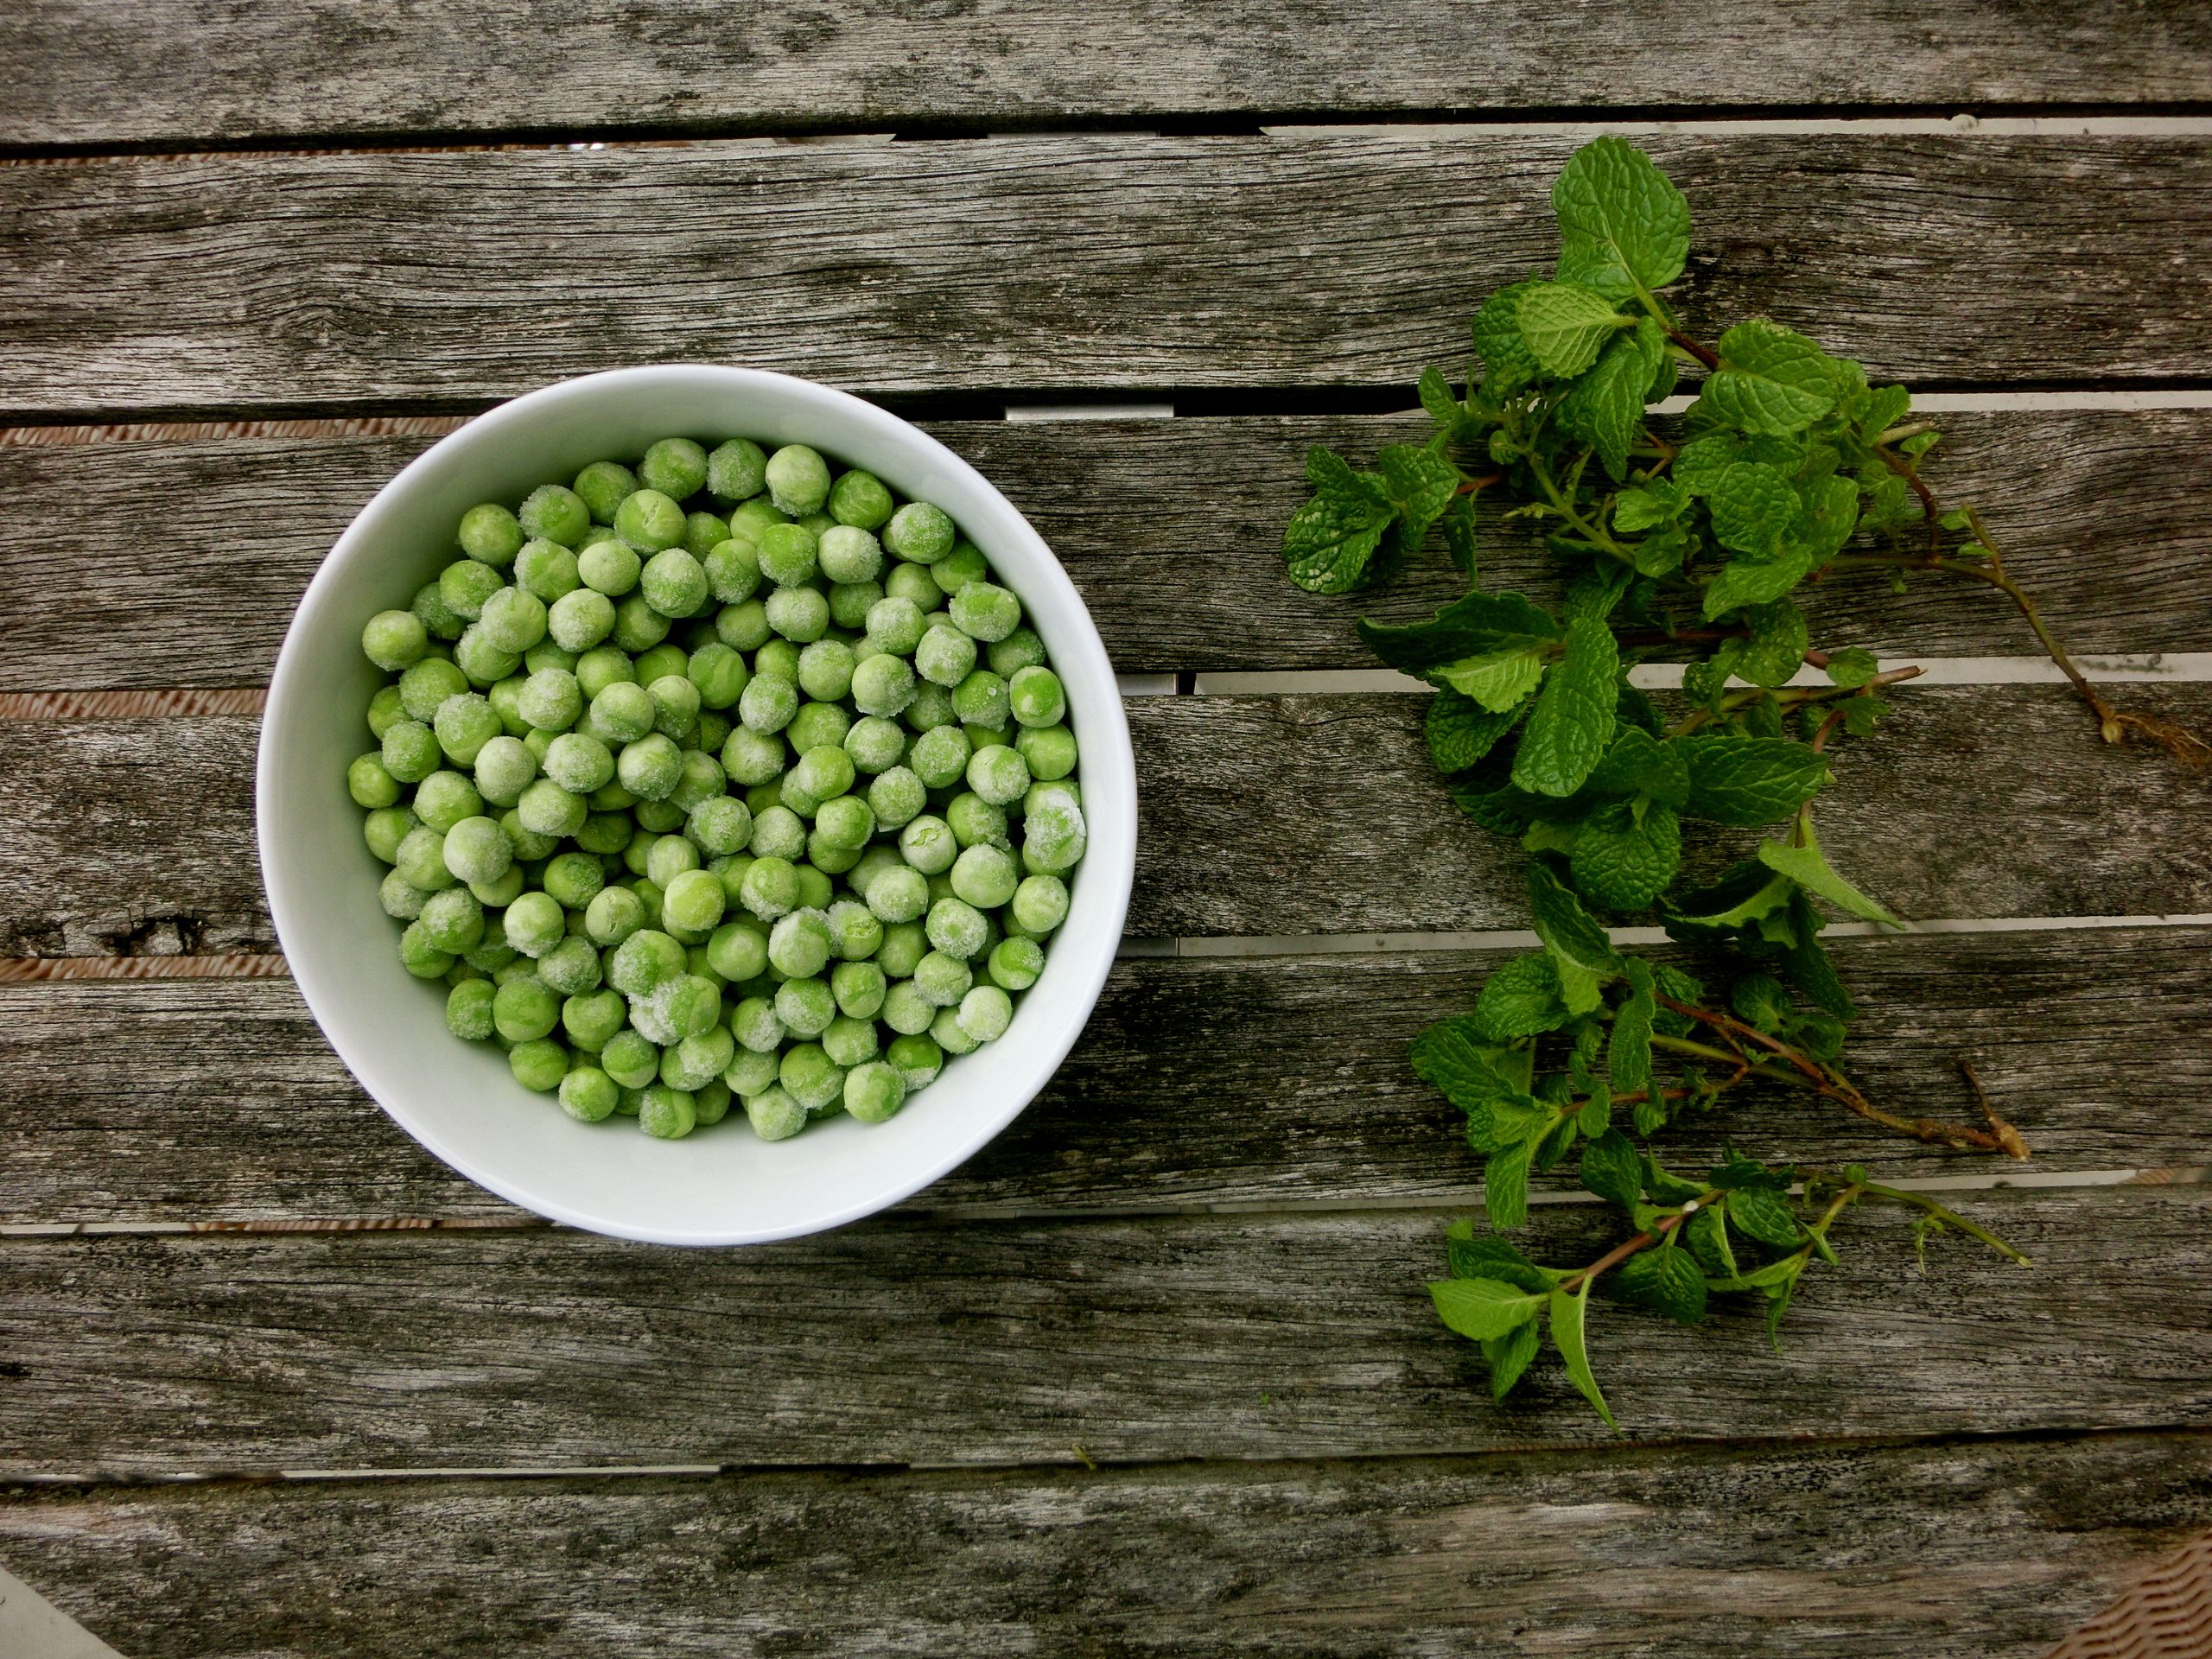 Peas and thank you